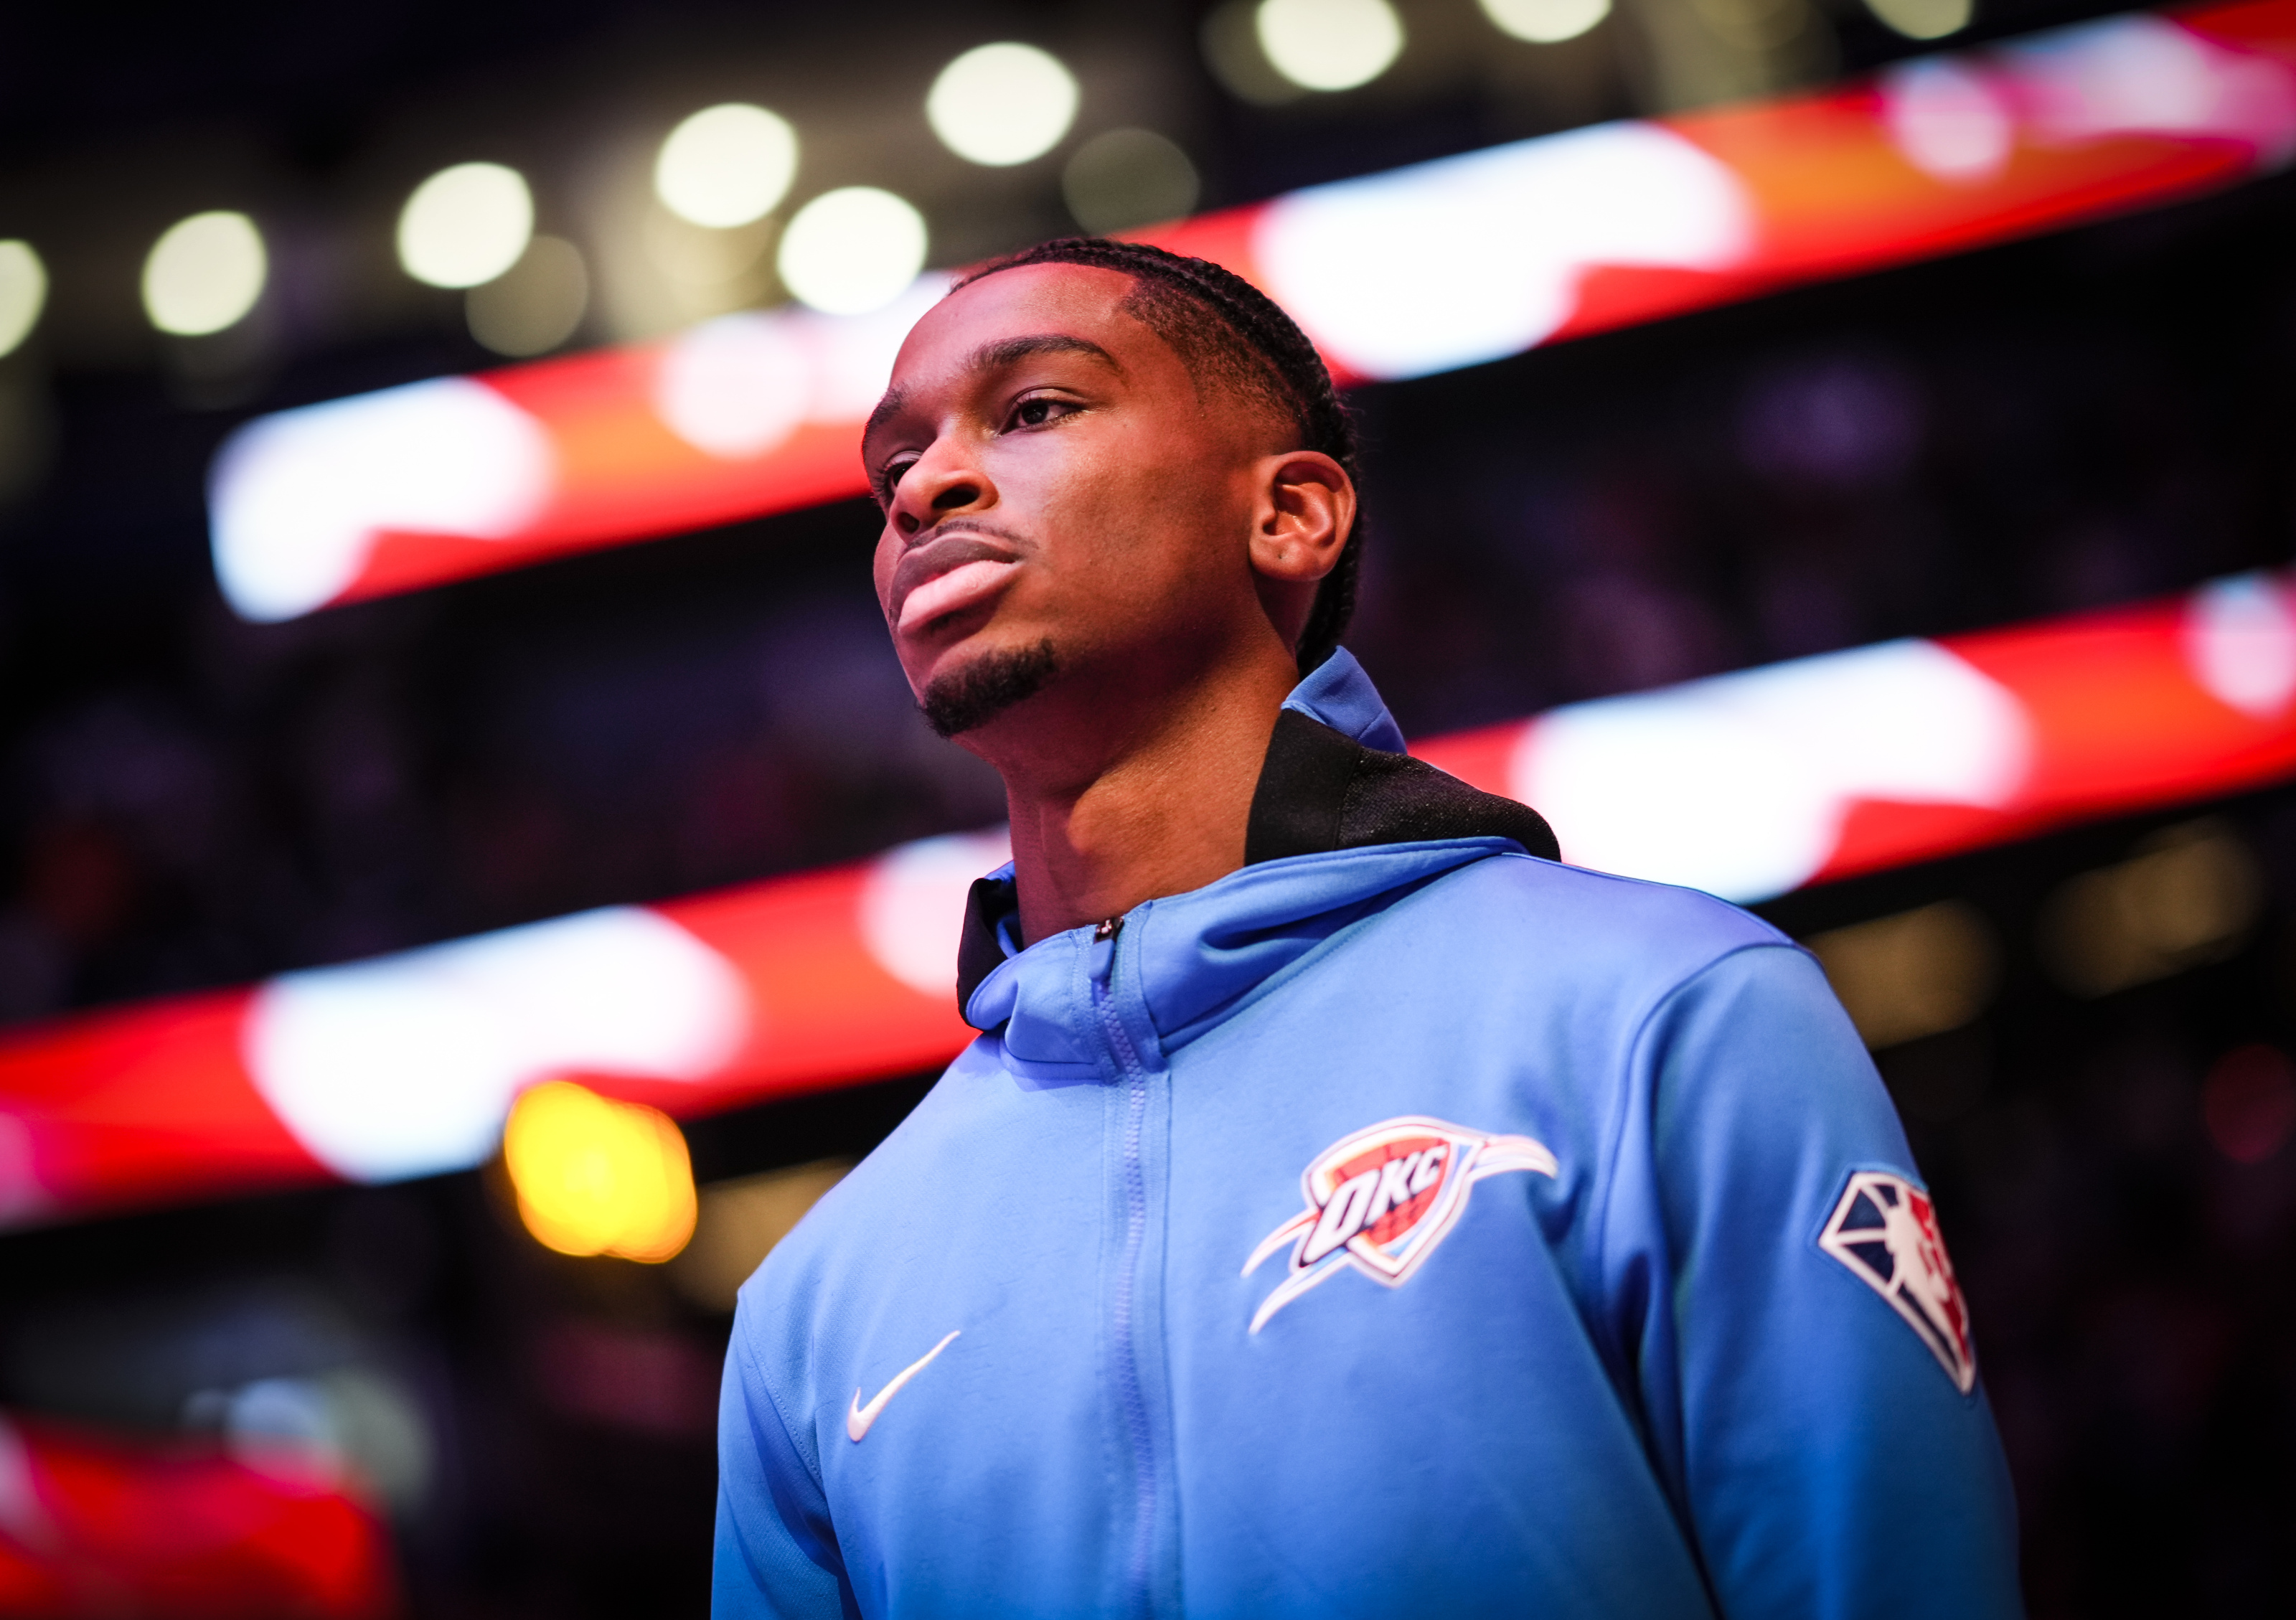 Thunder not planning to trade Shai Gilgeous-Alexander